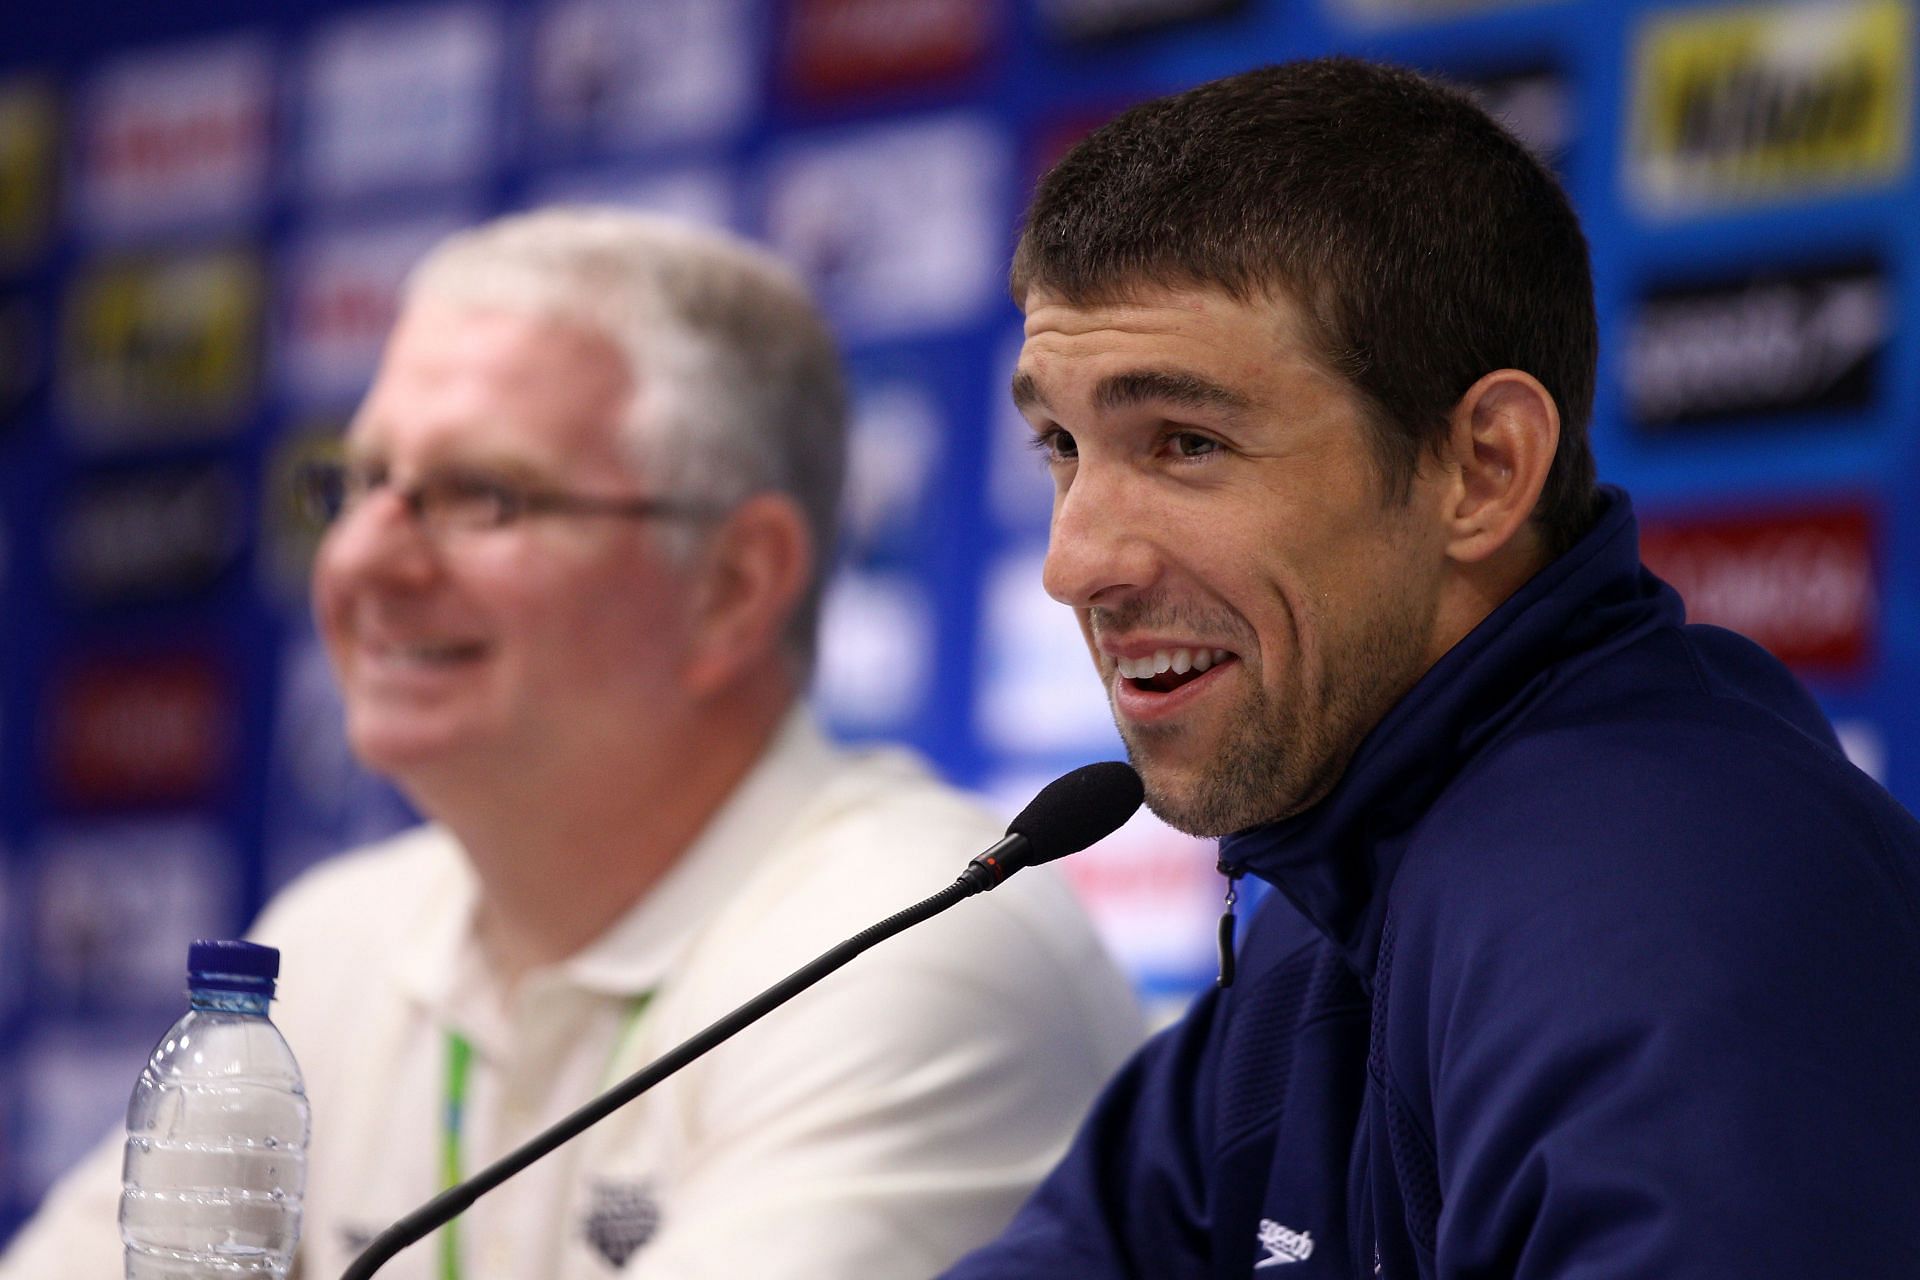 Michael Phelps of the United States and his coach Bob Bowman participate in a press conference on July 23, 2011 in Shanghai, China. (Photo by Feng Li/Getty Images)